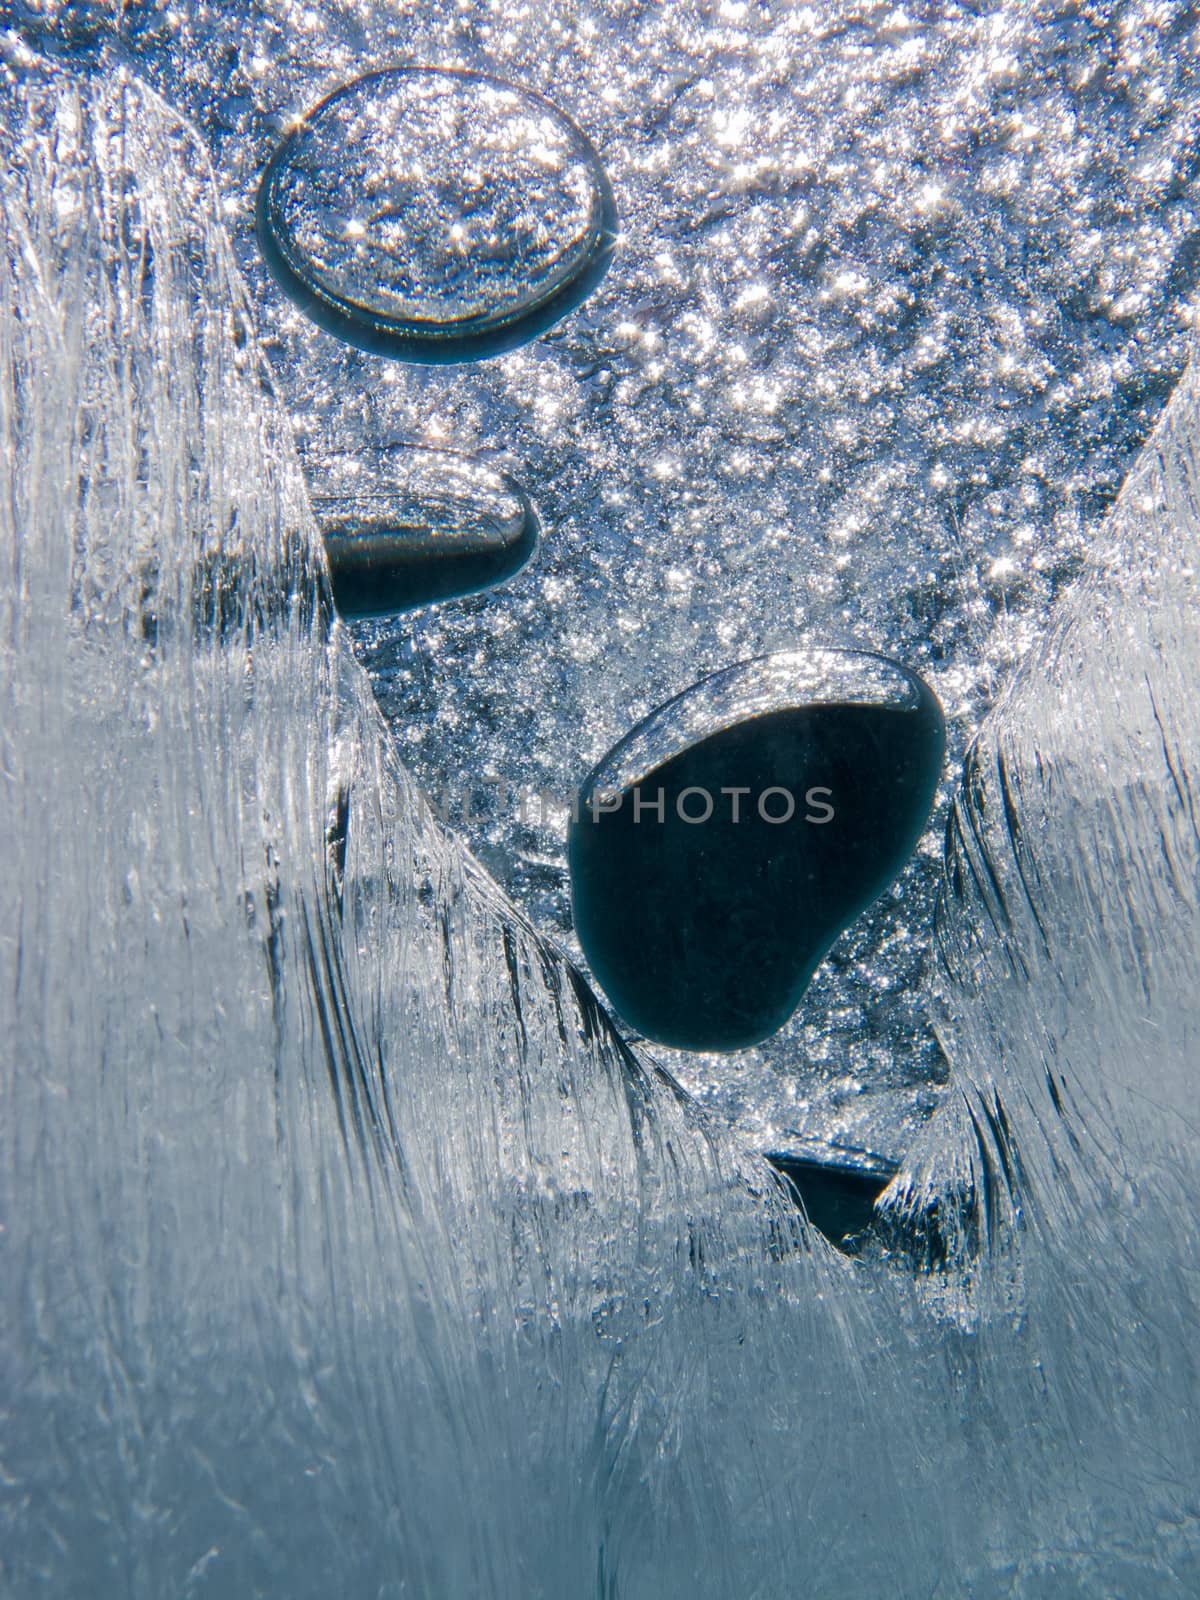 Air bubbles trapped under frozen ice surface mysterious underwater abstract